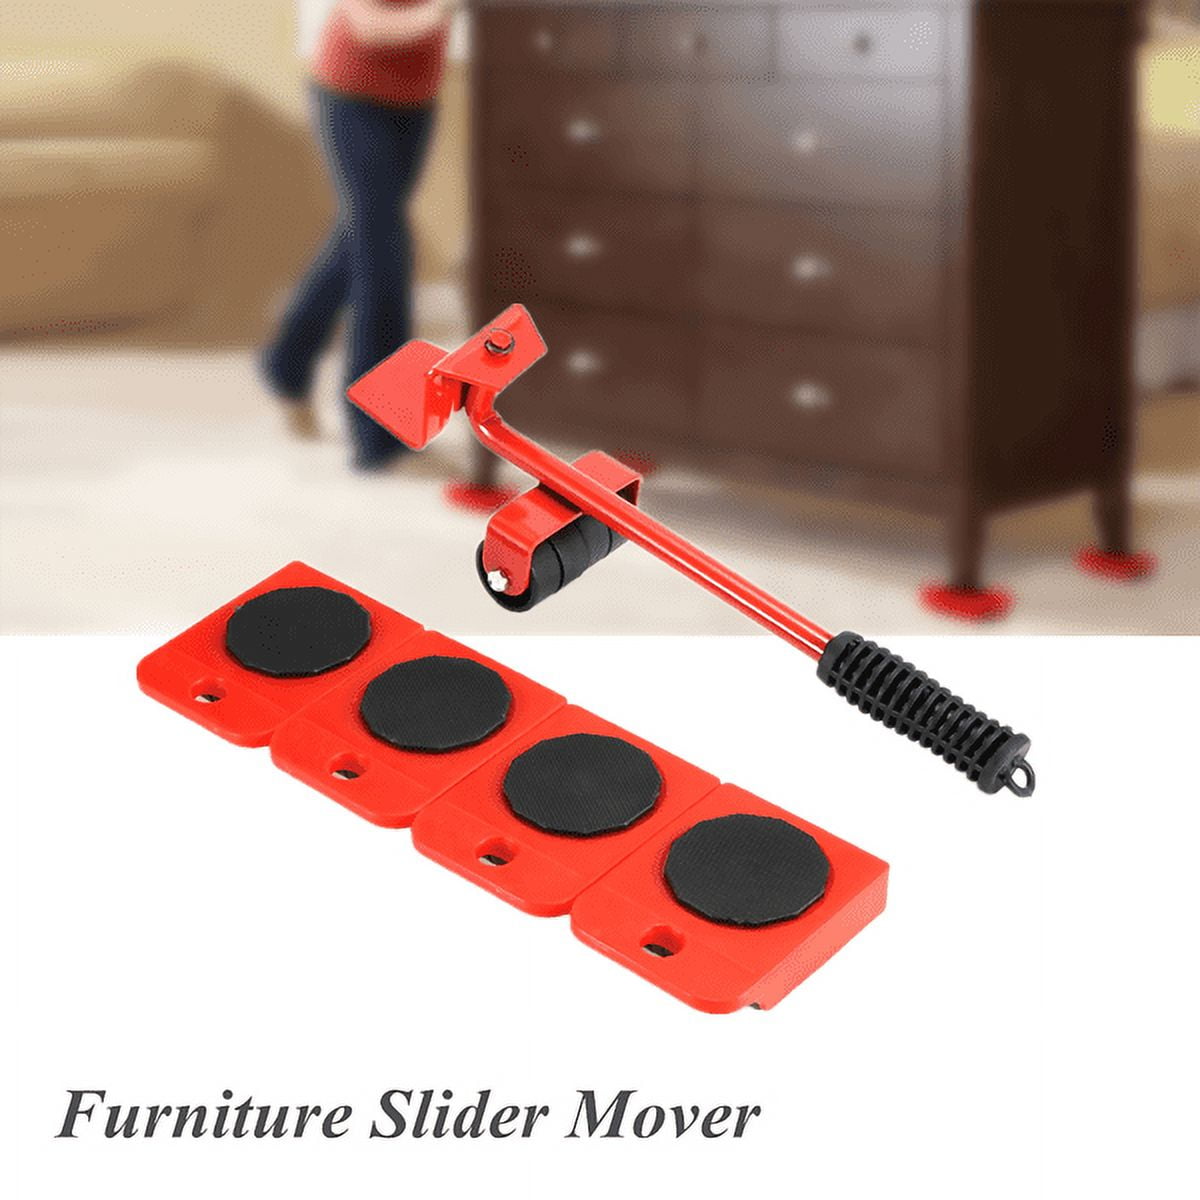  Zopsc Furniture Moving Tool, Furniture Lifter Shifter